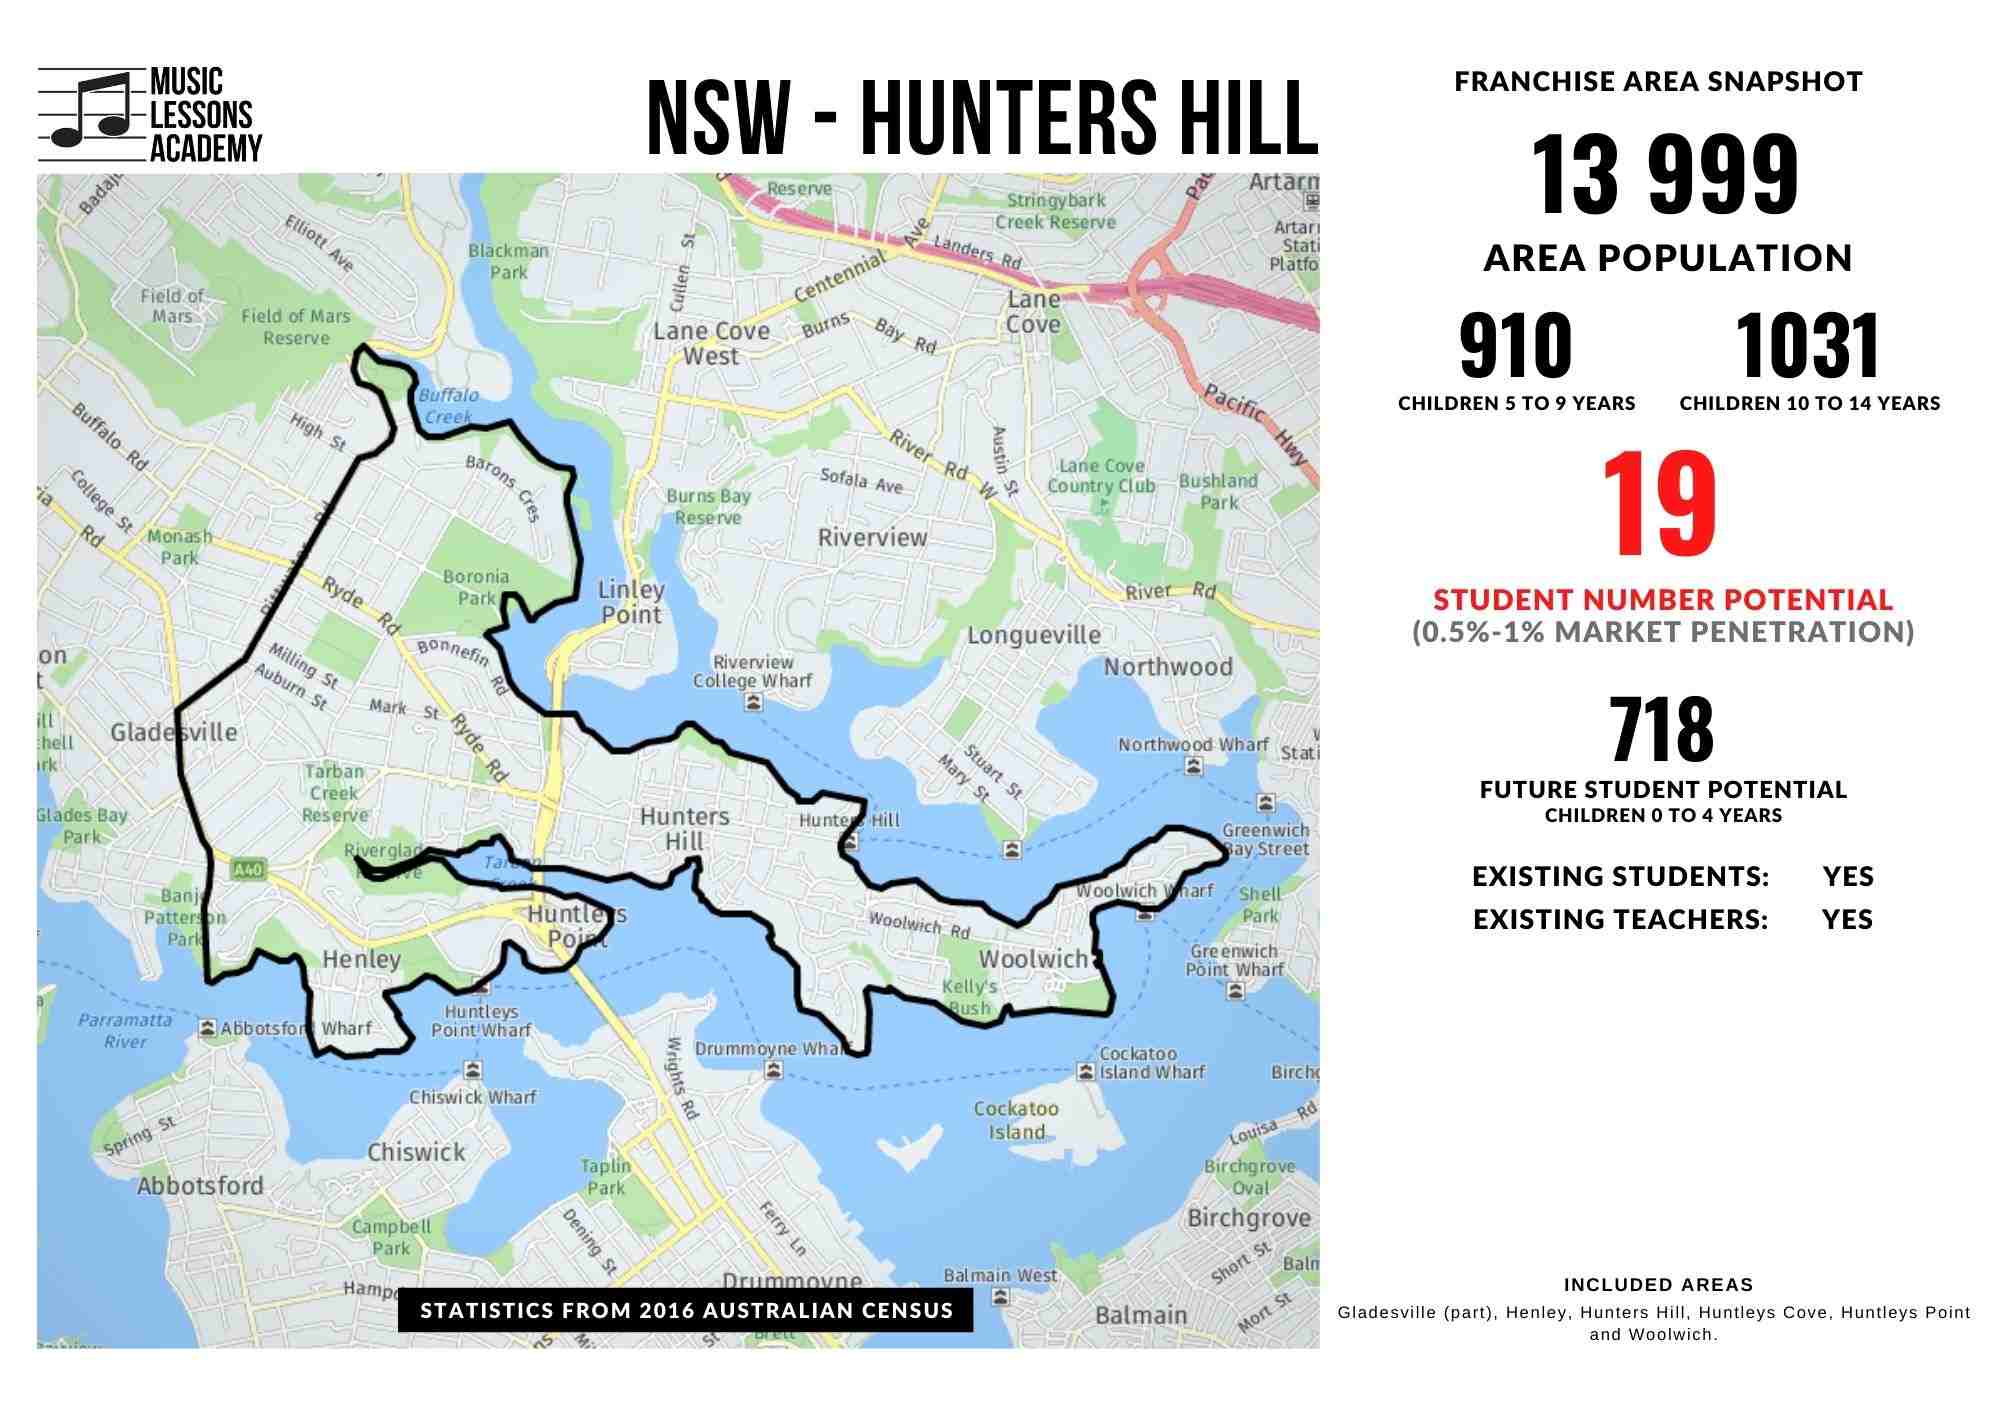 NSW Hunters Hill Franchise for sale